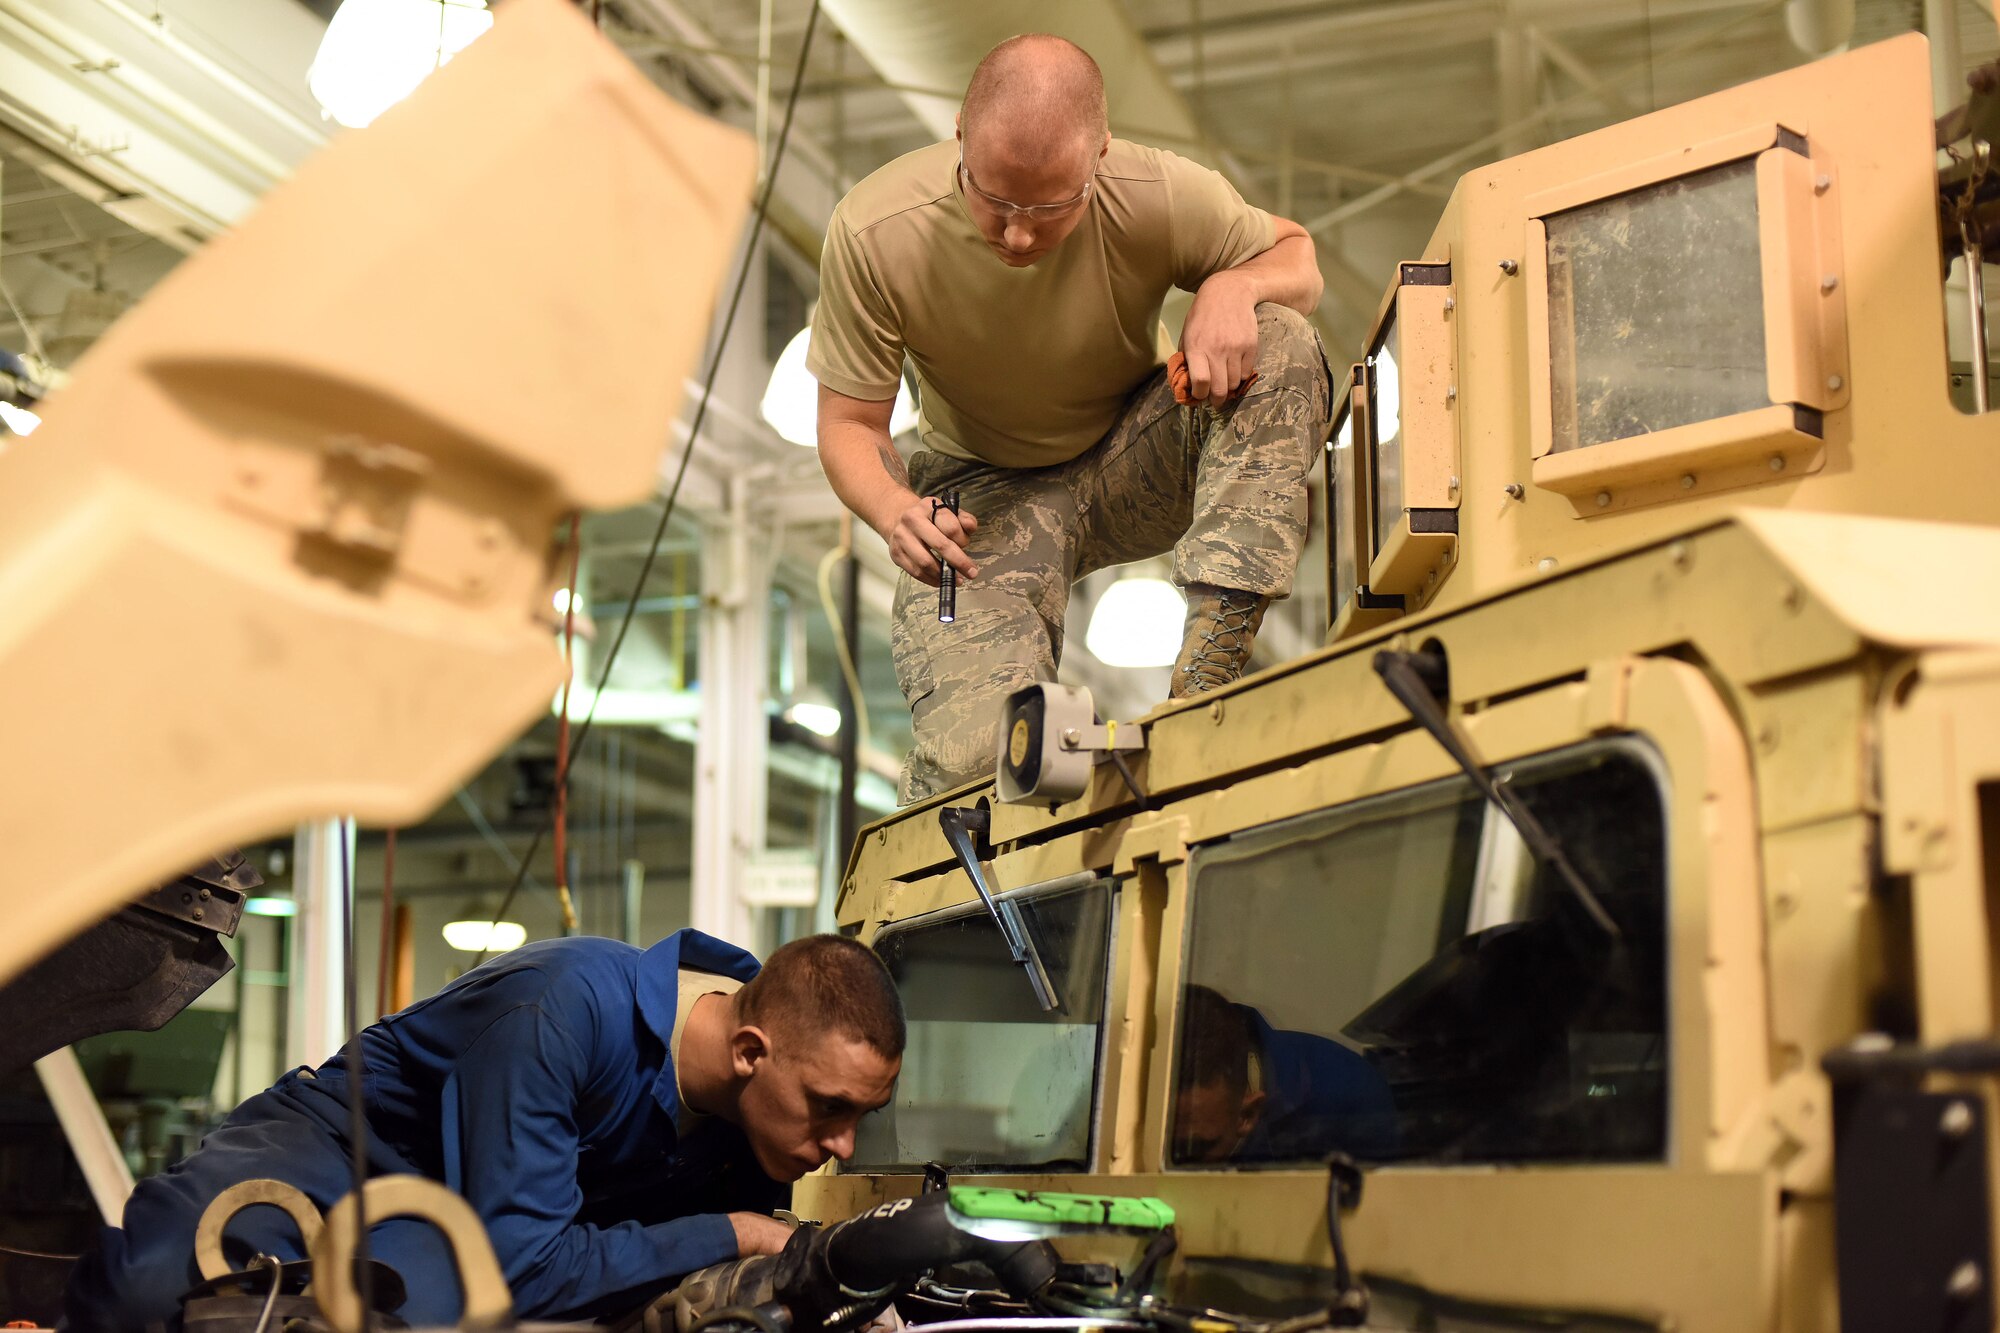 Senior Airman Elliott Packingham, 341st Logistics Readiness Squadron fleet management analyst, shines a light for Senior Airman Zachary Simmons, 341st LRS vehicle maintenance journeyman, as he makes repairs to a Humvee during exercise GLOBAL THUNDER 16, Nov. 6, 2015 at Malmstrom Air Force Base, Mont. Packingham and Simmons repaired the Humvee during a 12-hour shift as part of the exercise. The 341st LRS is part of U.S. Strategic Command’s (USSTRATCOM) Task Force 214 and supports the command’s strategic deterrence mission by operating and maintaining the Air Force’s Intercontinental Ballistic Missile force. GLOBAL THUNDER is an annual U.S. Strategic Command training event that assesses command and control functionality in all USSTRATCOM mission areas and affords component commands a venue to evaluate their joint operational readiness. Planning for GLOBAL THUNDER 16 has been under way for more than a year and is based on a notional scenario with fictitious adversaries. USSTRATCOM, one of nine DoD unified combatant commands, relies on various task forces for the execution of its global missions, which also include space operations; cyberspace operations; joint electronic warfare; global strike; missile defense; intelligence, surveillance and reconnaissance; combating weapons of mass destruction; and analysis and targeting. (U.S. Air Force photo by Airman Collin Schmidt)